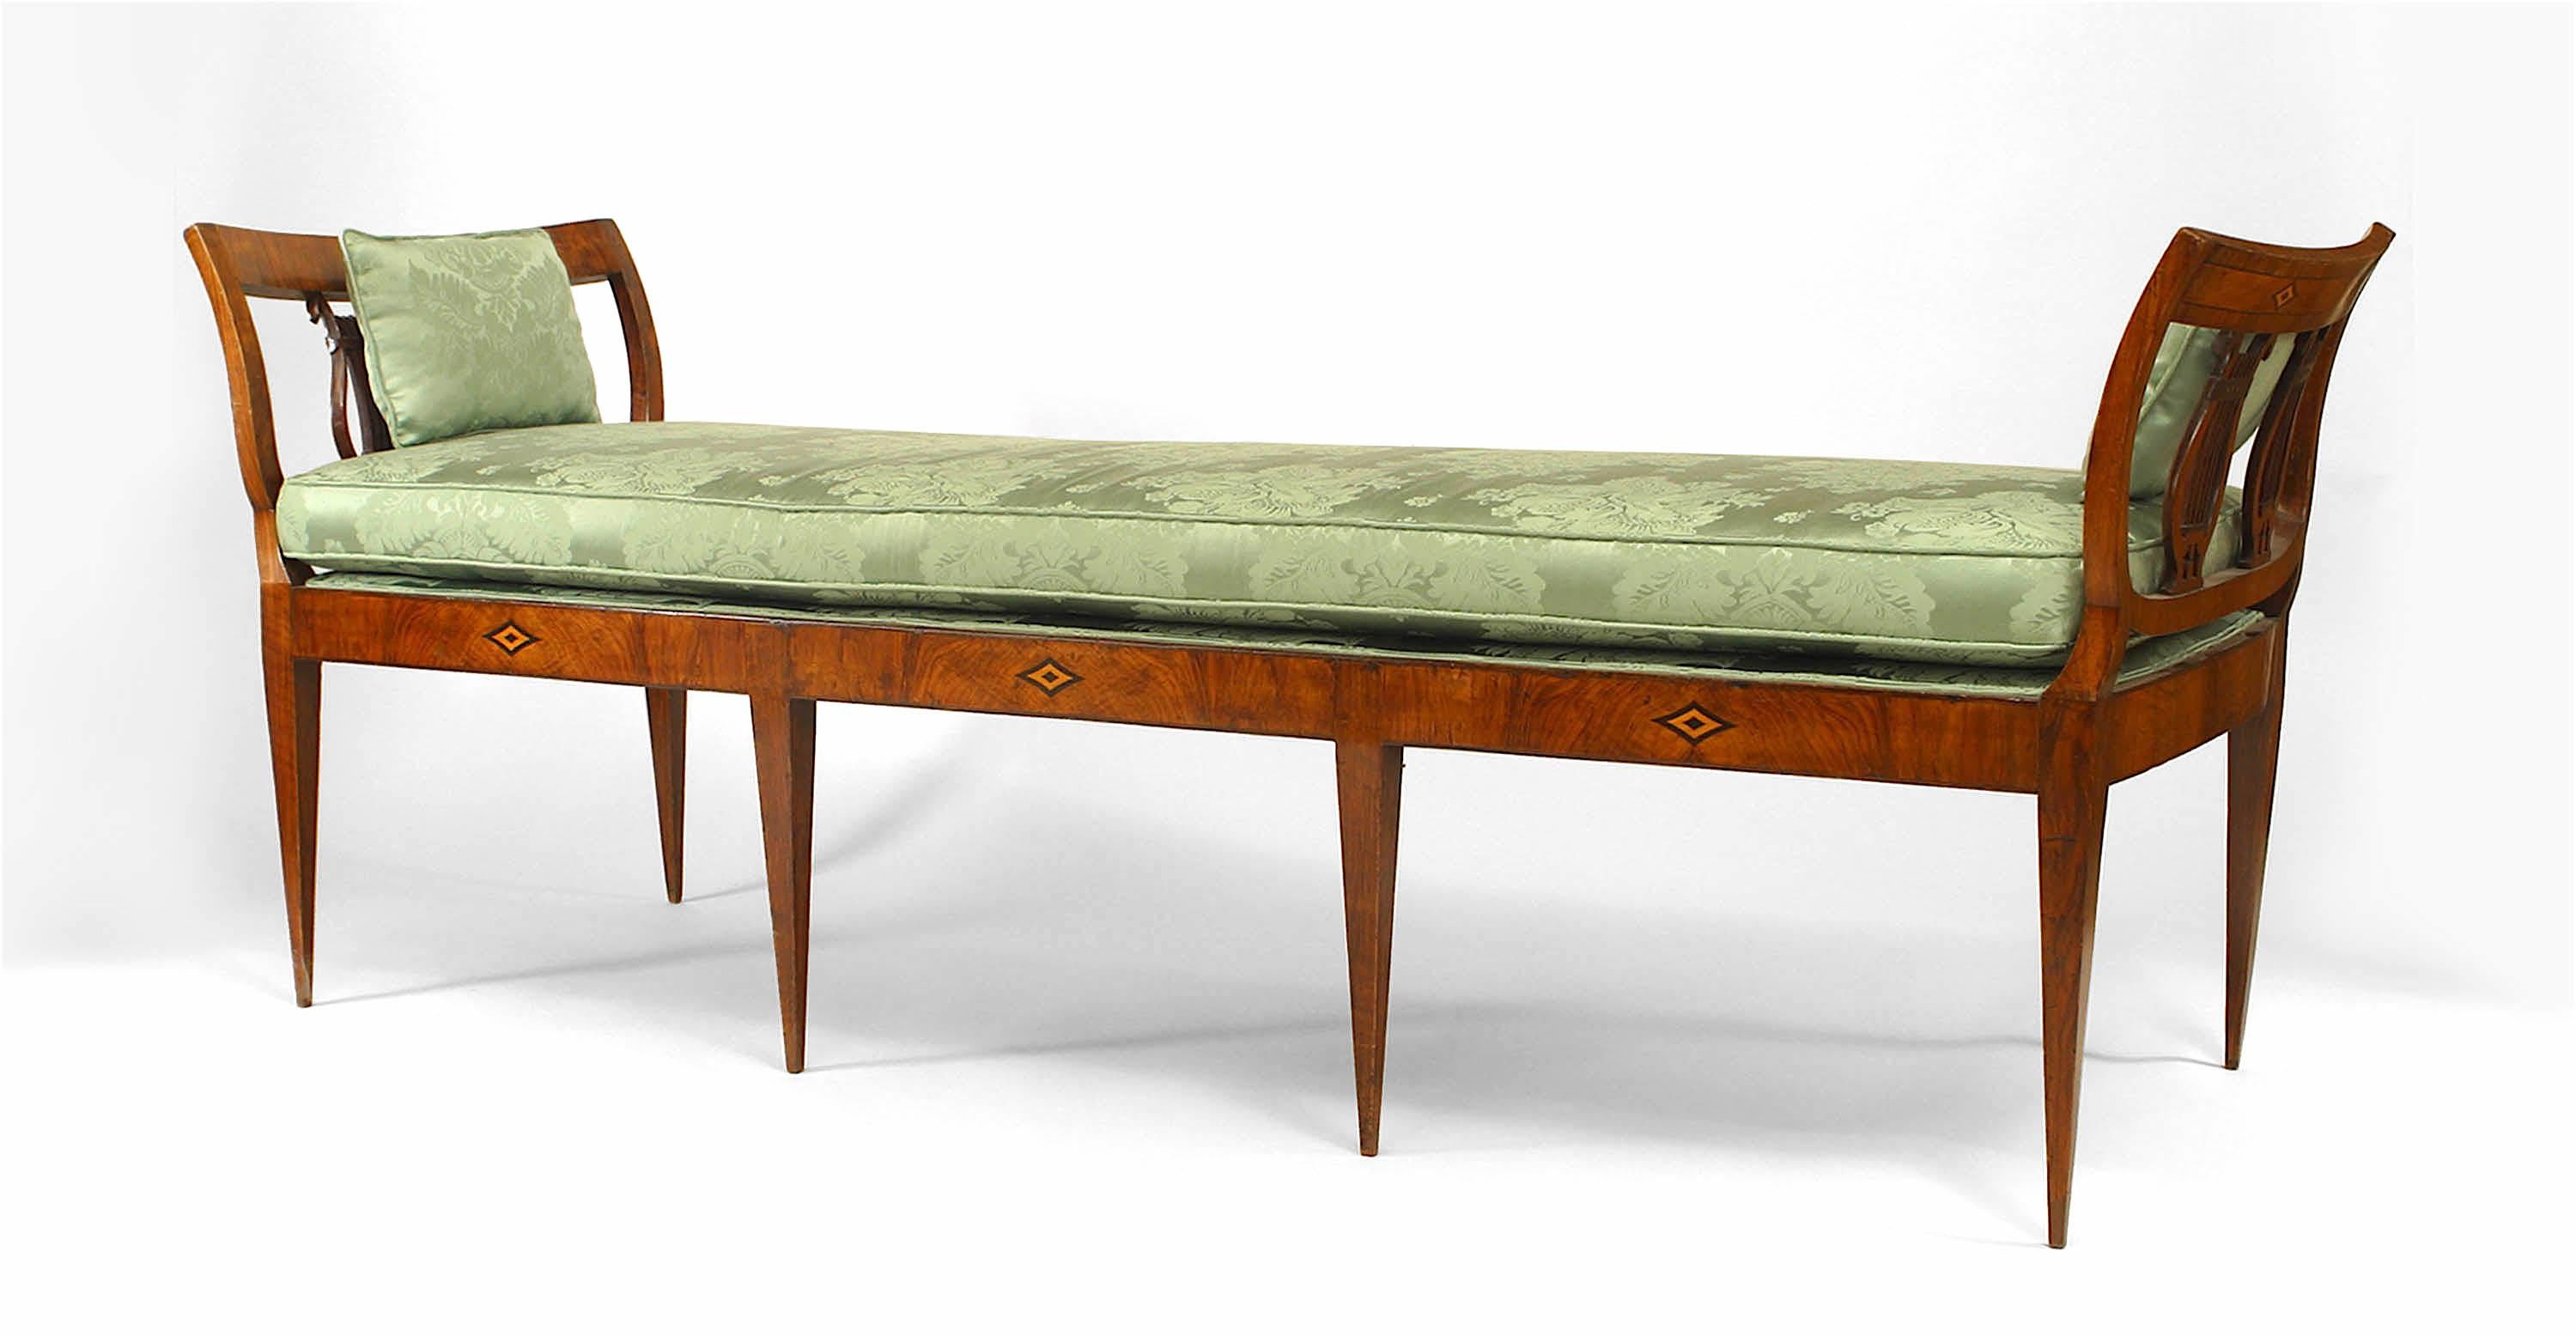 German Biedermeier walnut bench / daybed on tapered legs with open double lyre side arms and marquetry diamond design inlay with green upholstered seat cushion.
